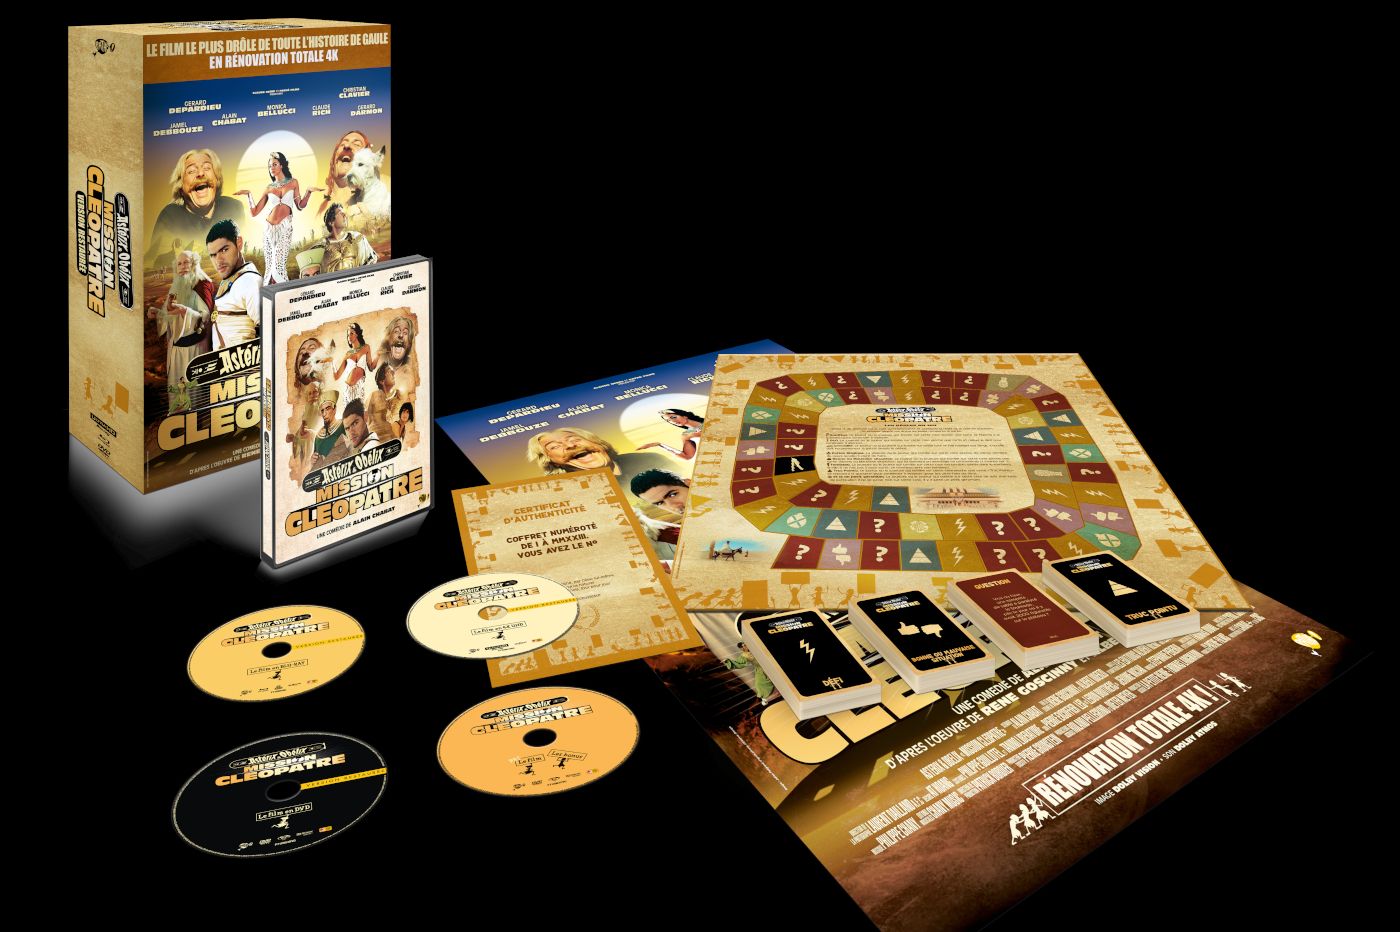 asterix mission cleopatre 4k collector